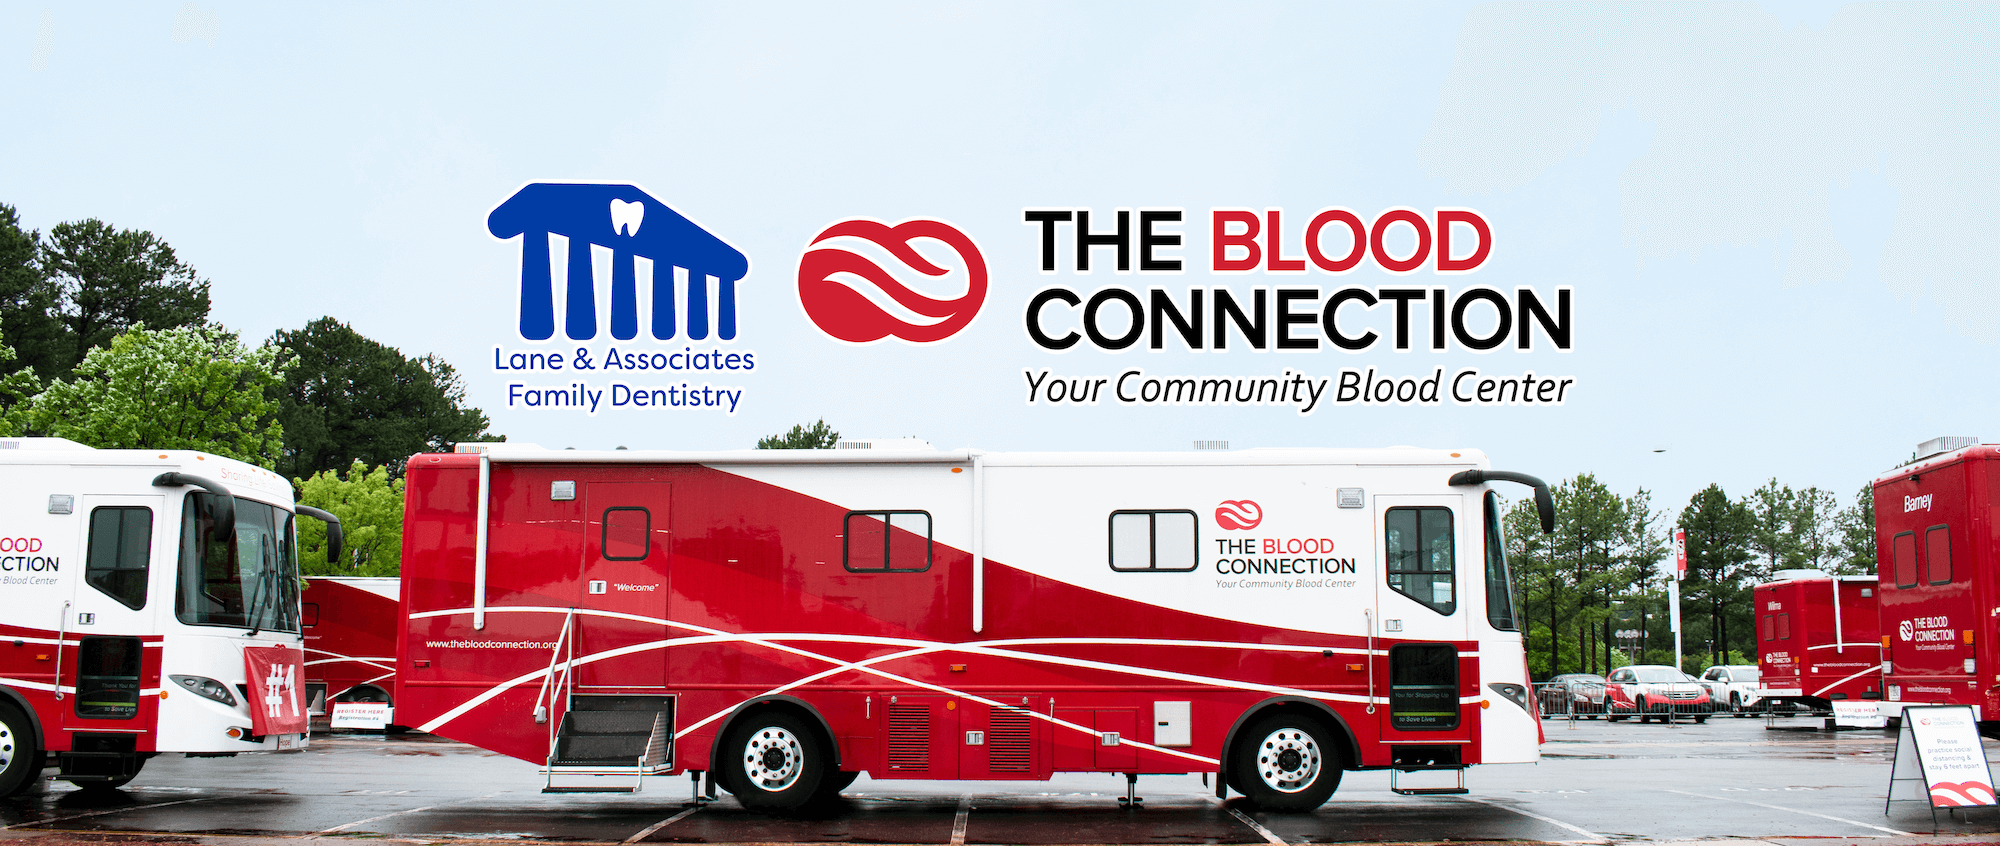 The Blood Connection Mobile Bus parked at Blood Drive